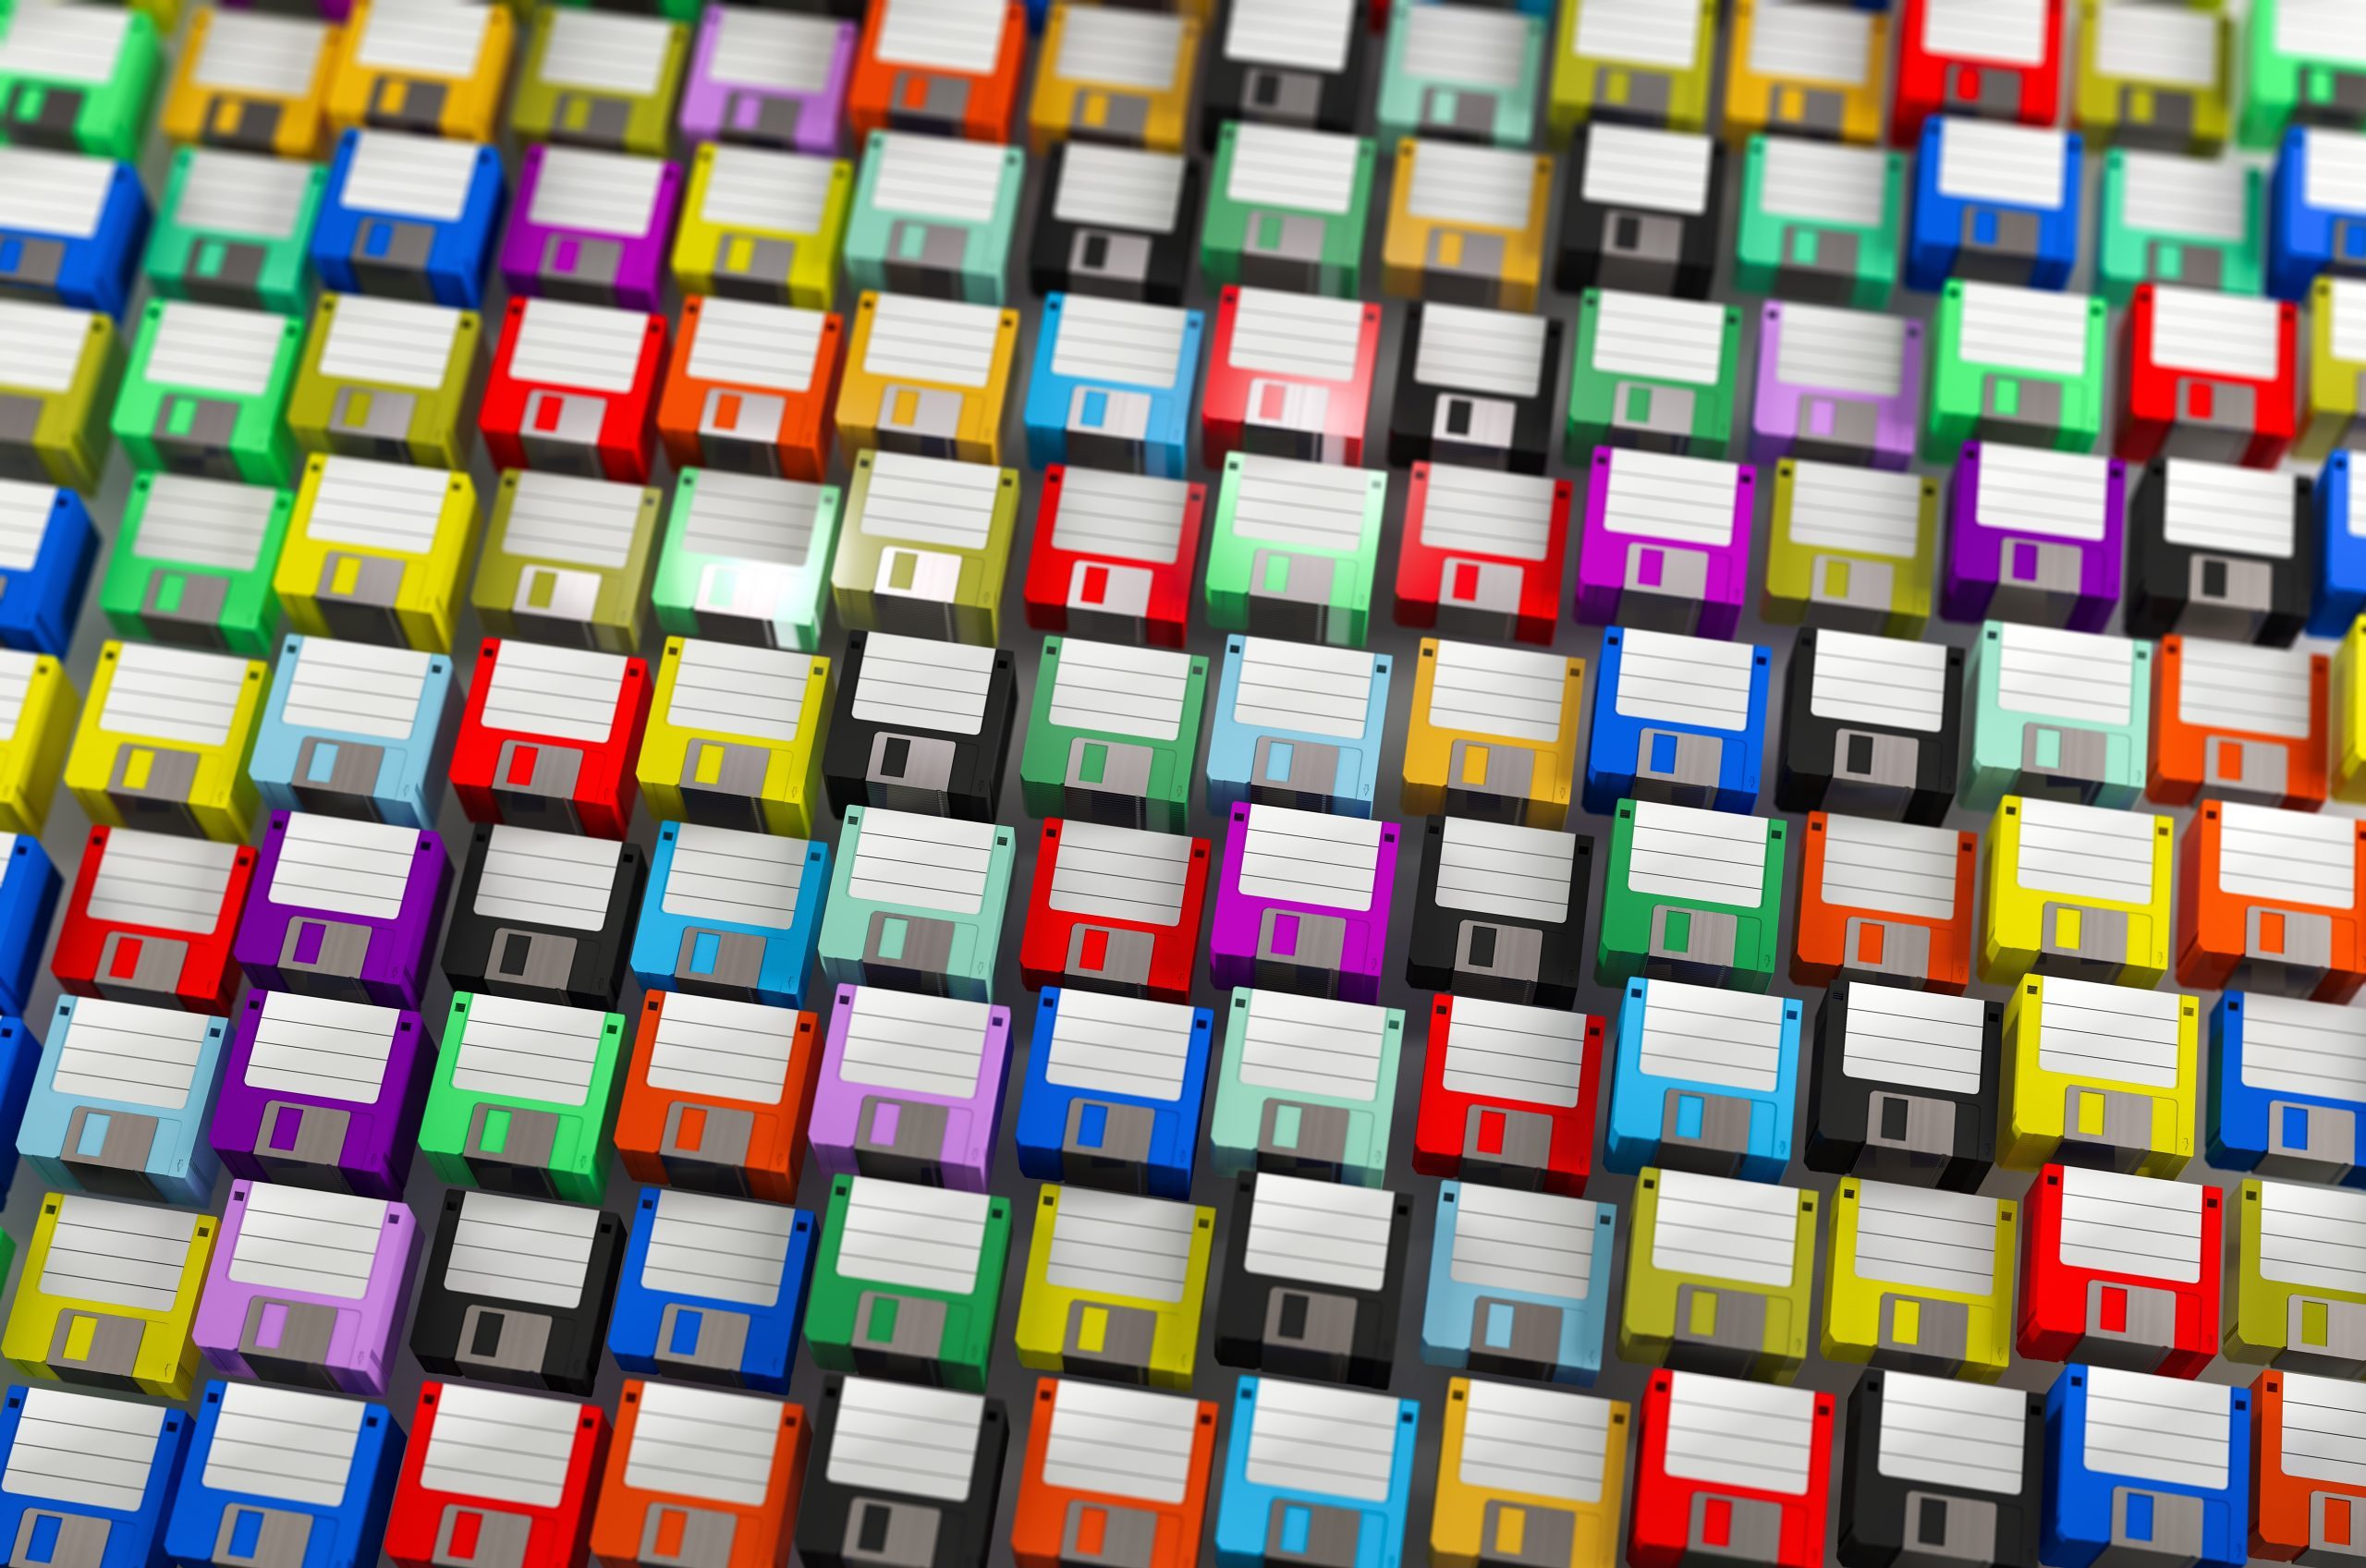 lots-of-brand-new-colorful-floppy-disks-2022-11-07-06-09-49-utc